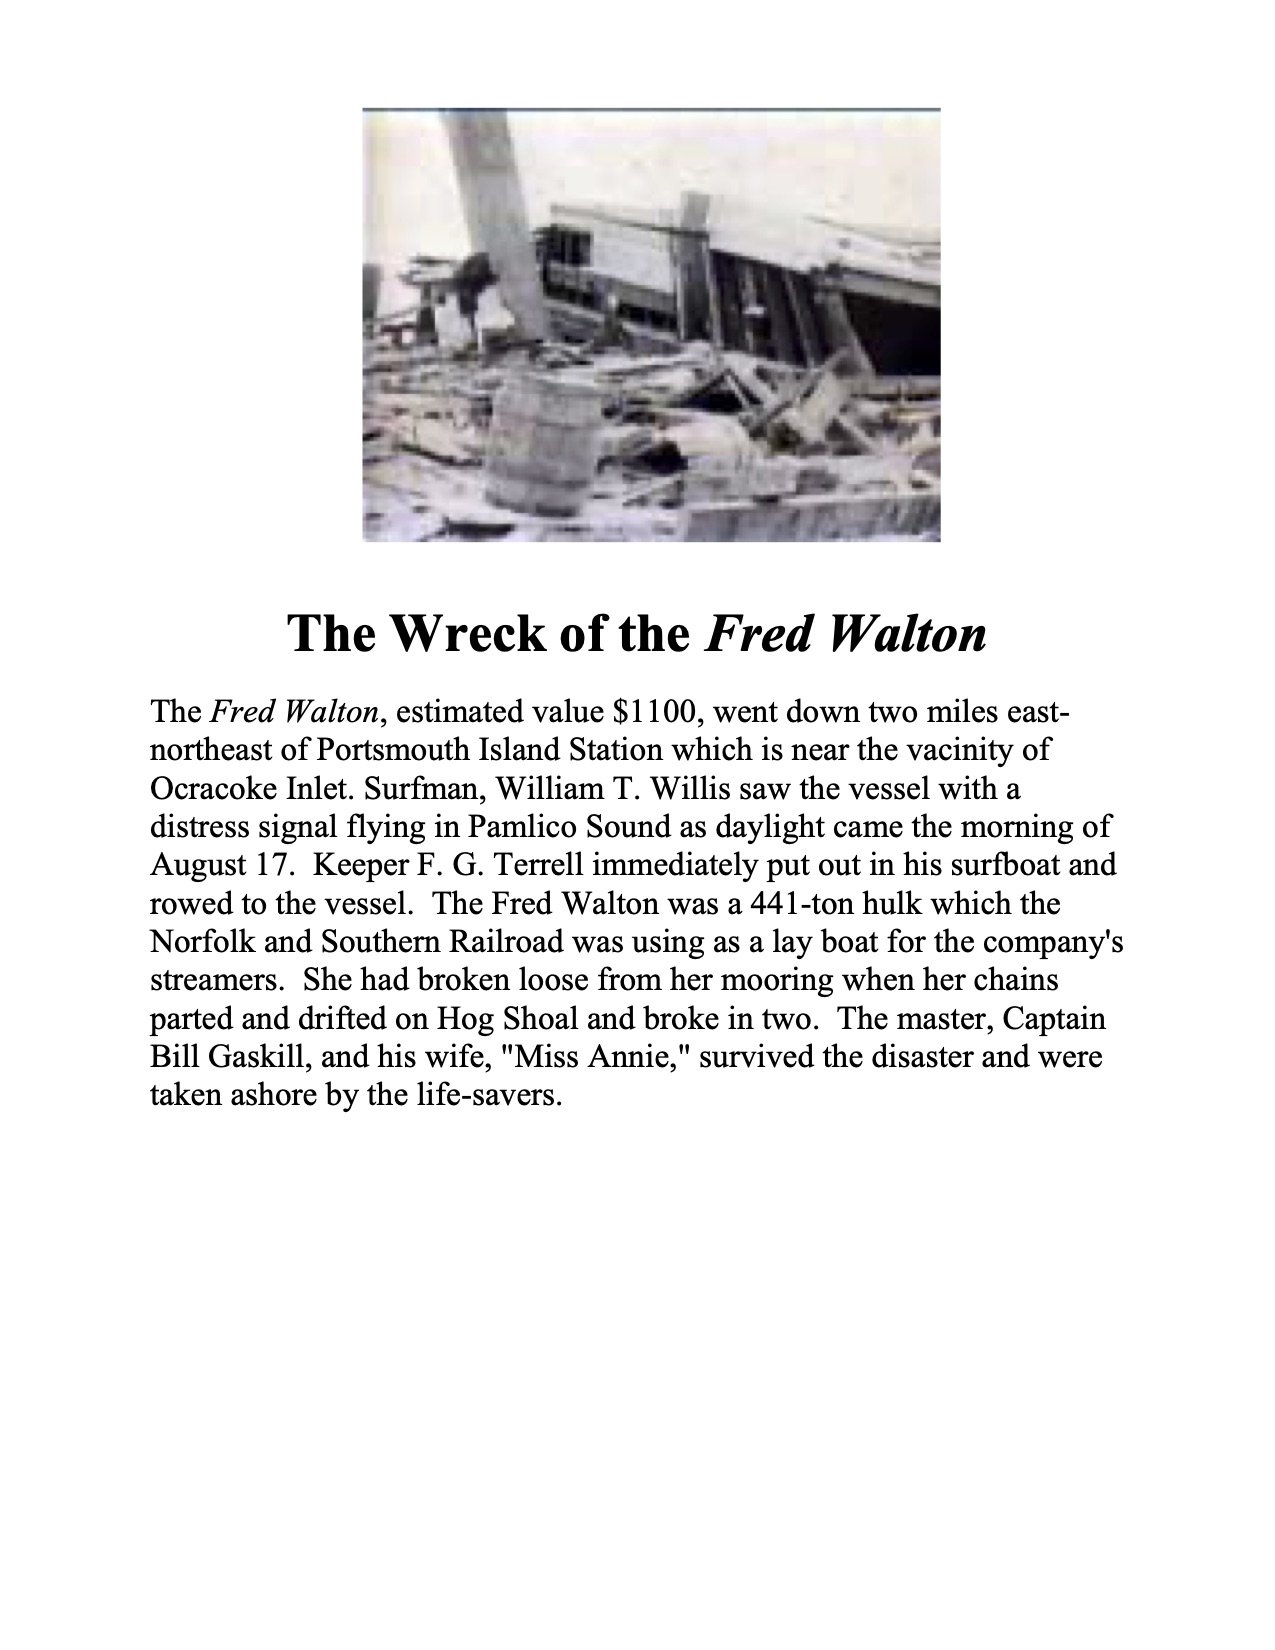 The Wreck of the Fred Walton Portsmouth.jpg